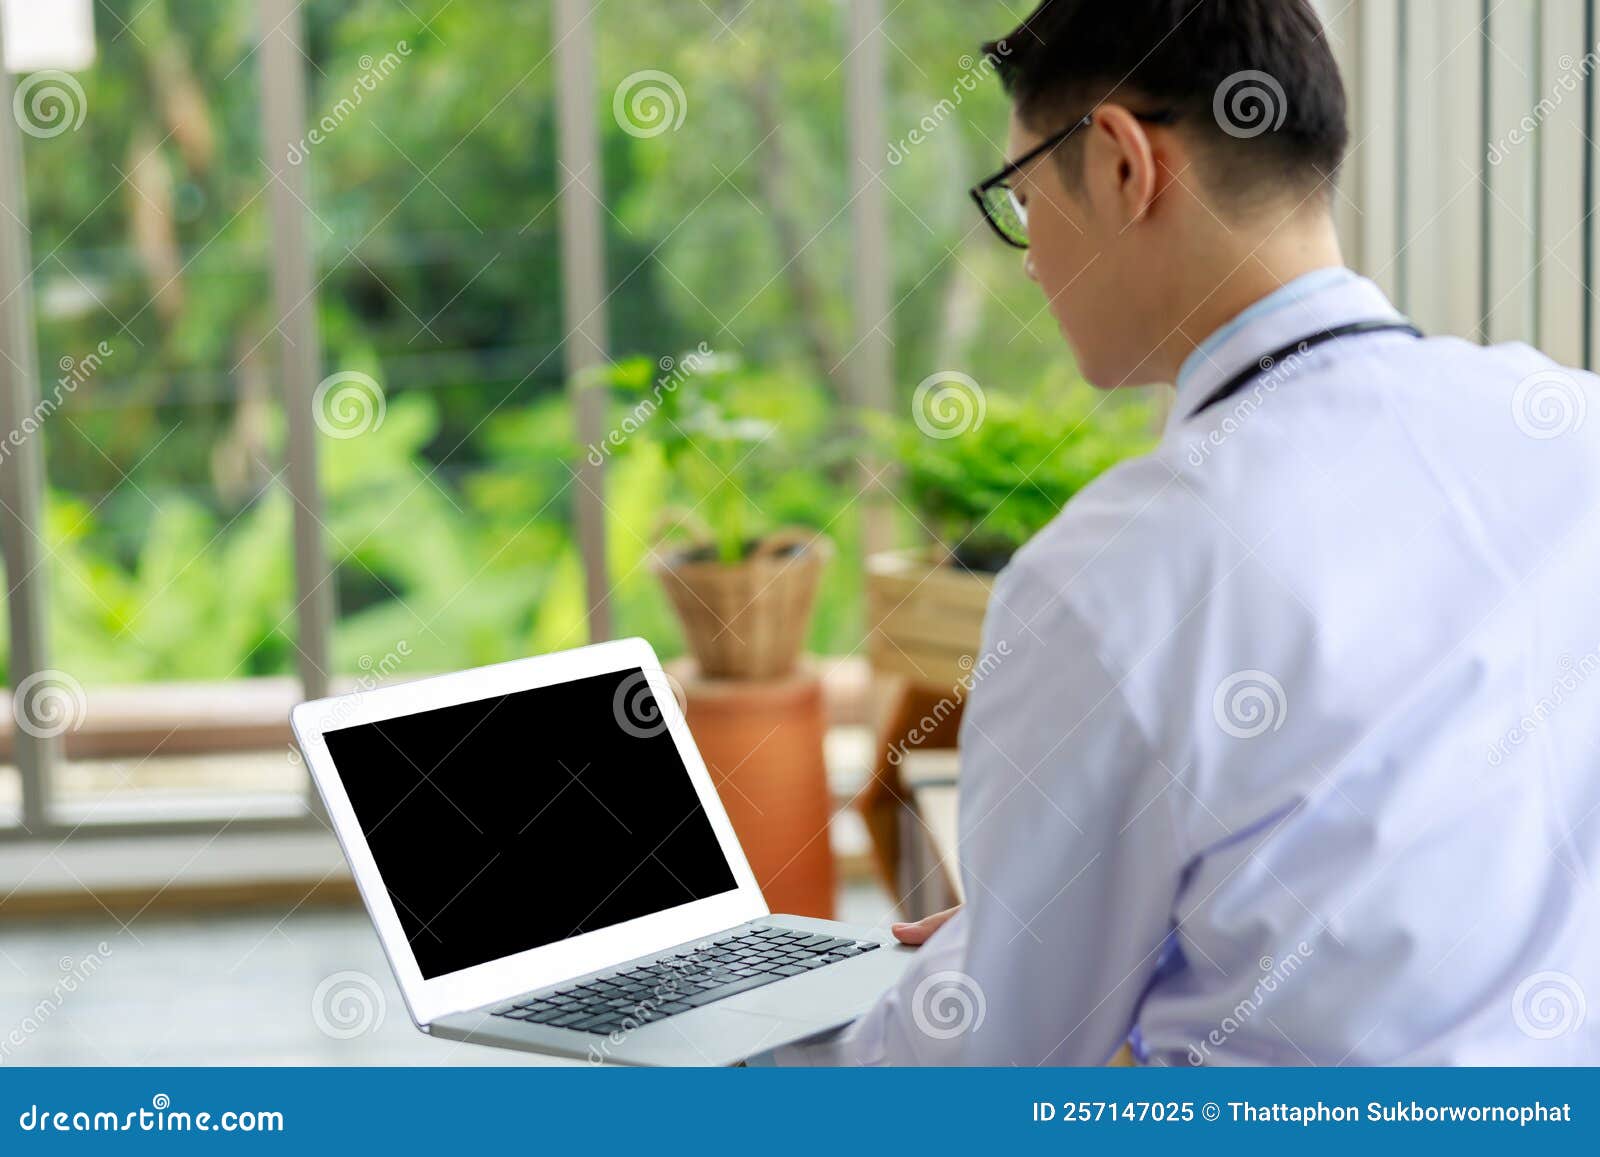 doctor man looking down at laptopp in office